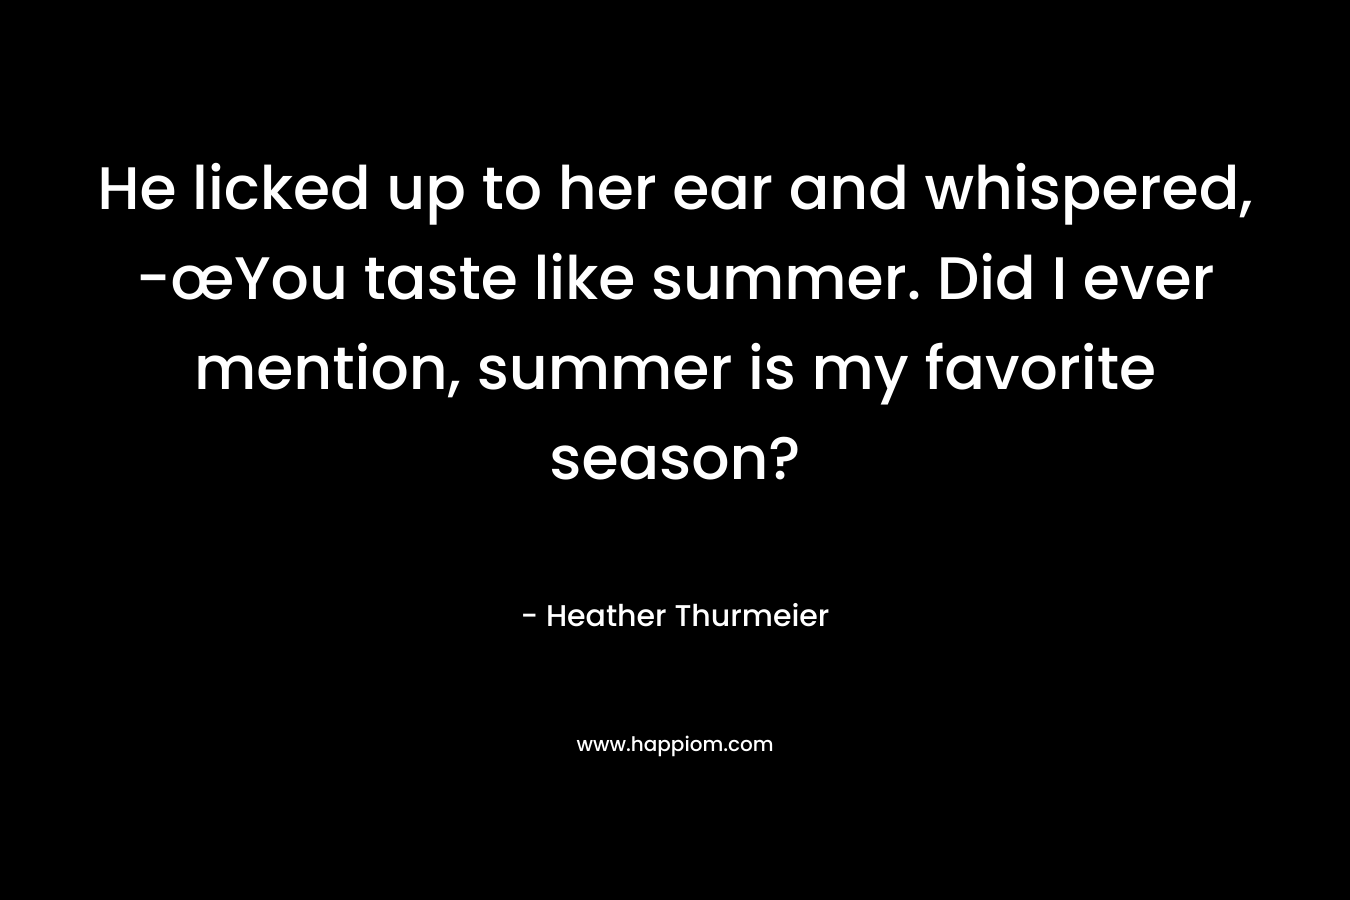 He licked up to her ear and whispered, -œYou taste like summer. Did I ever mention, summer is my favorite season?